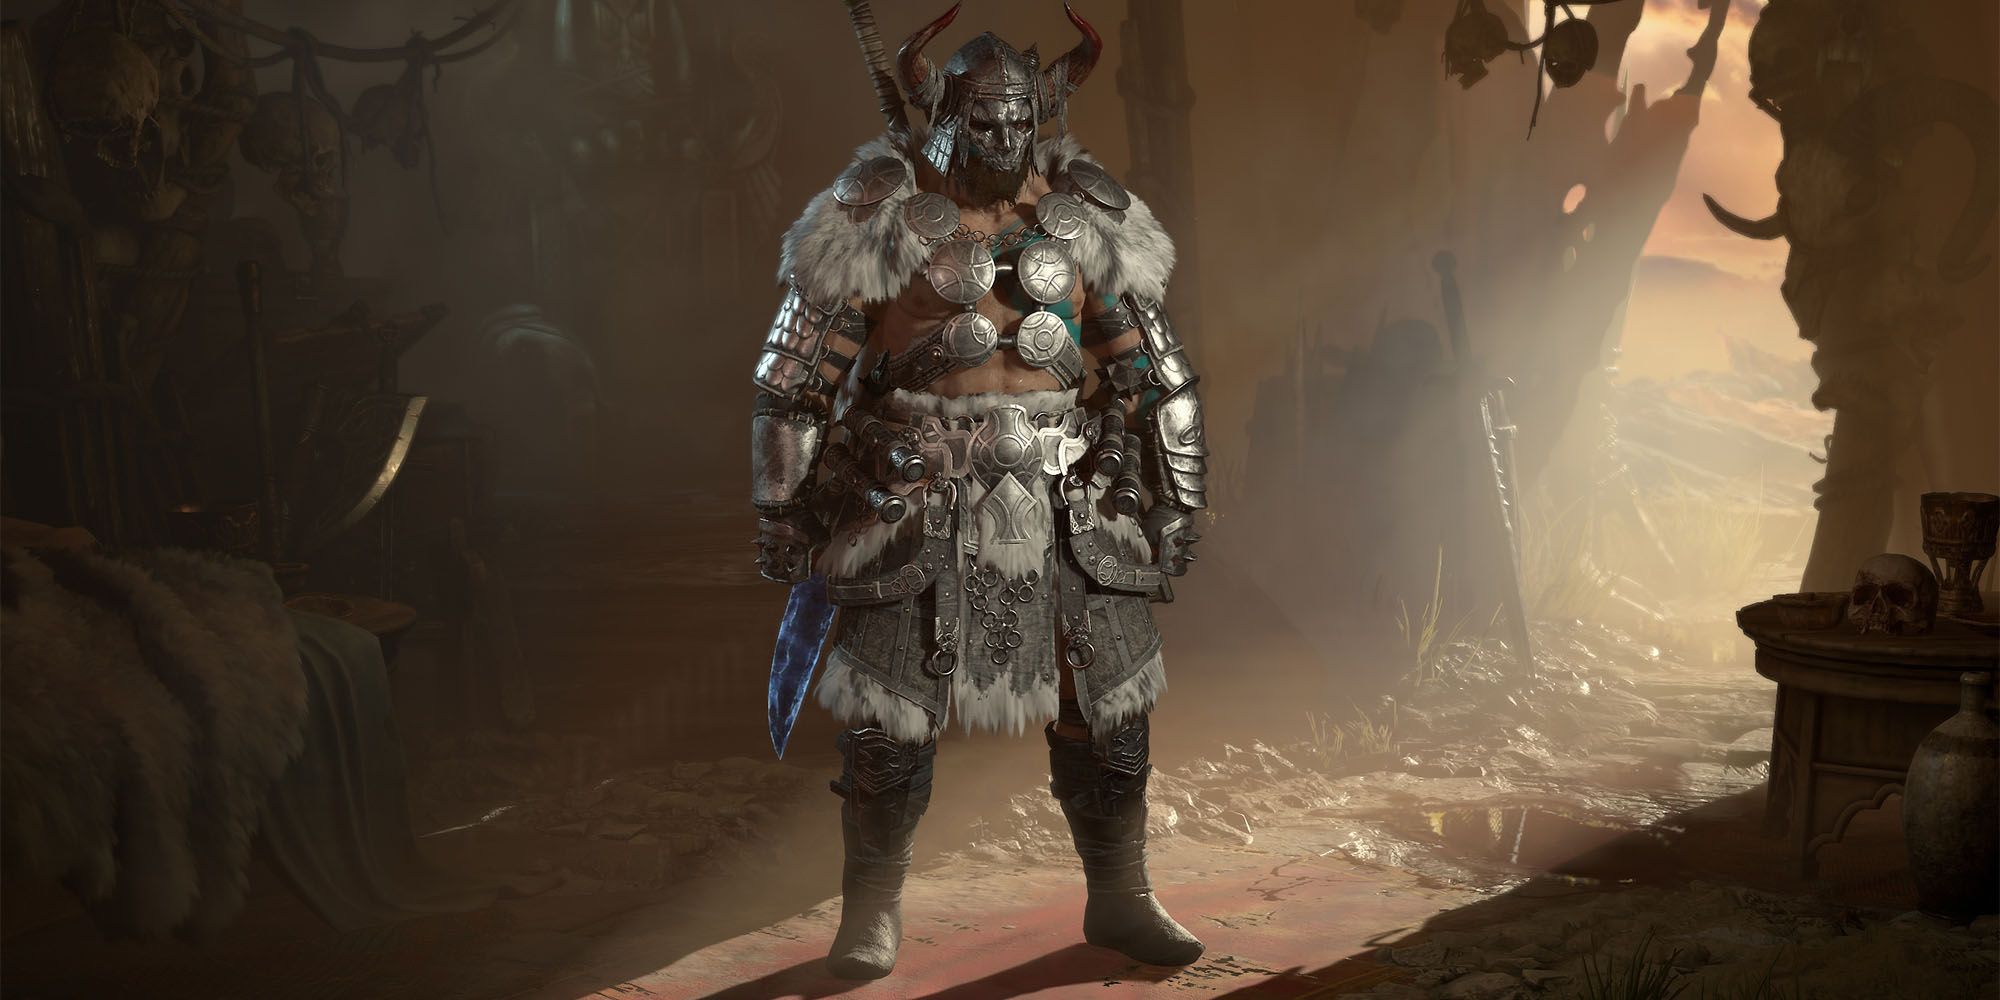 barbarian on character select menu wearing silver and gray armor